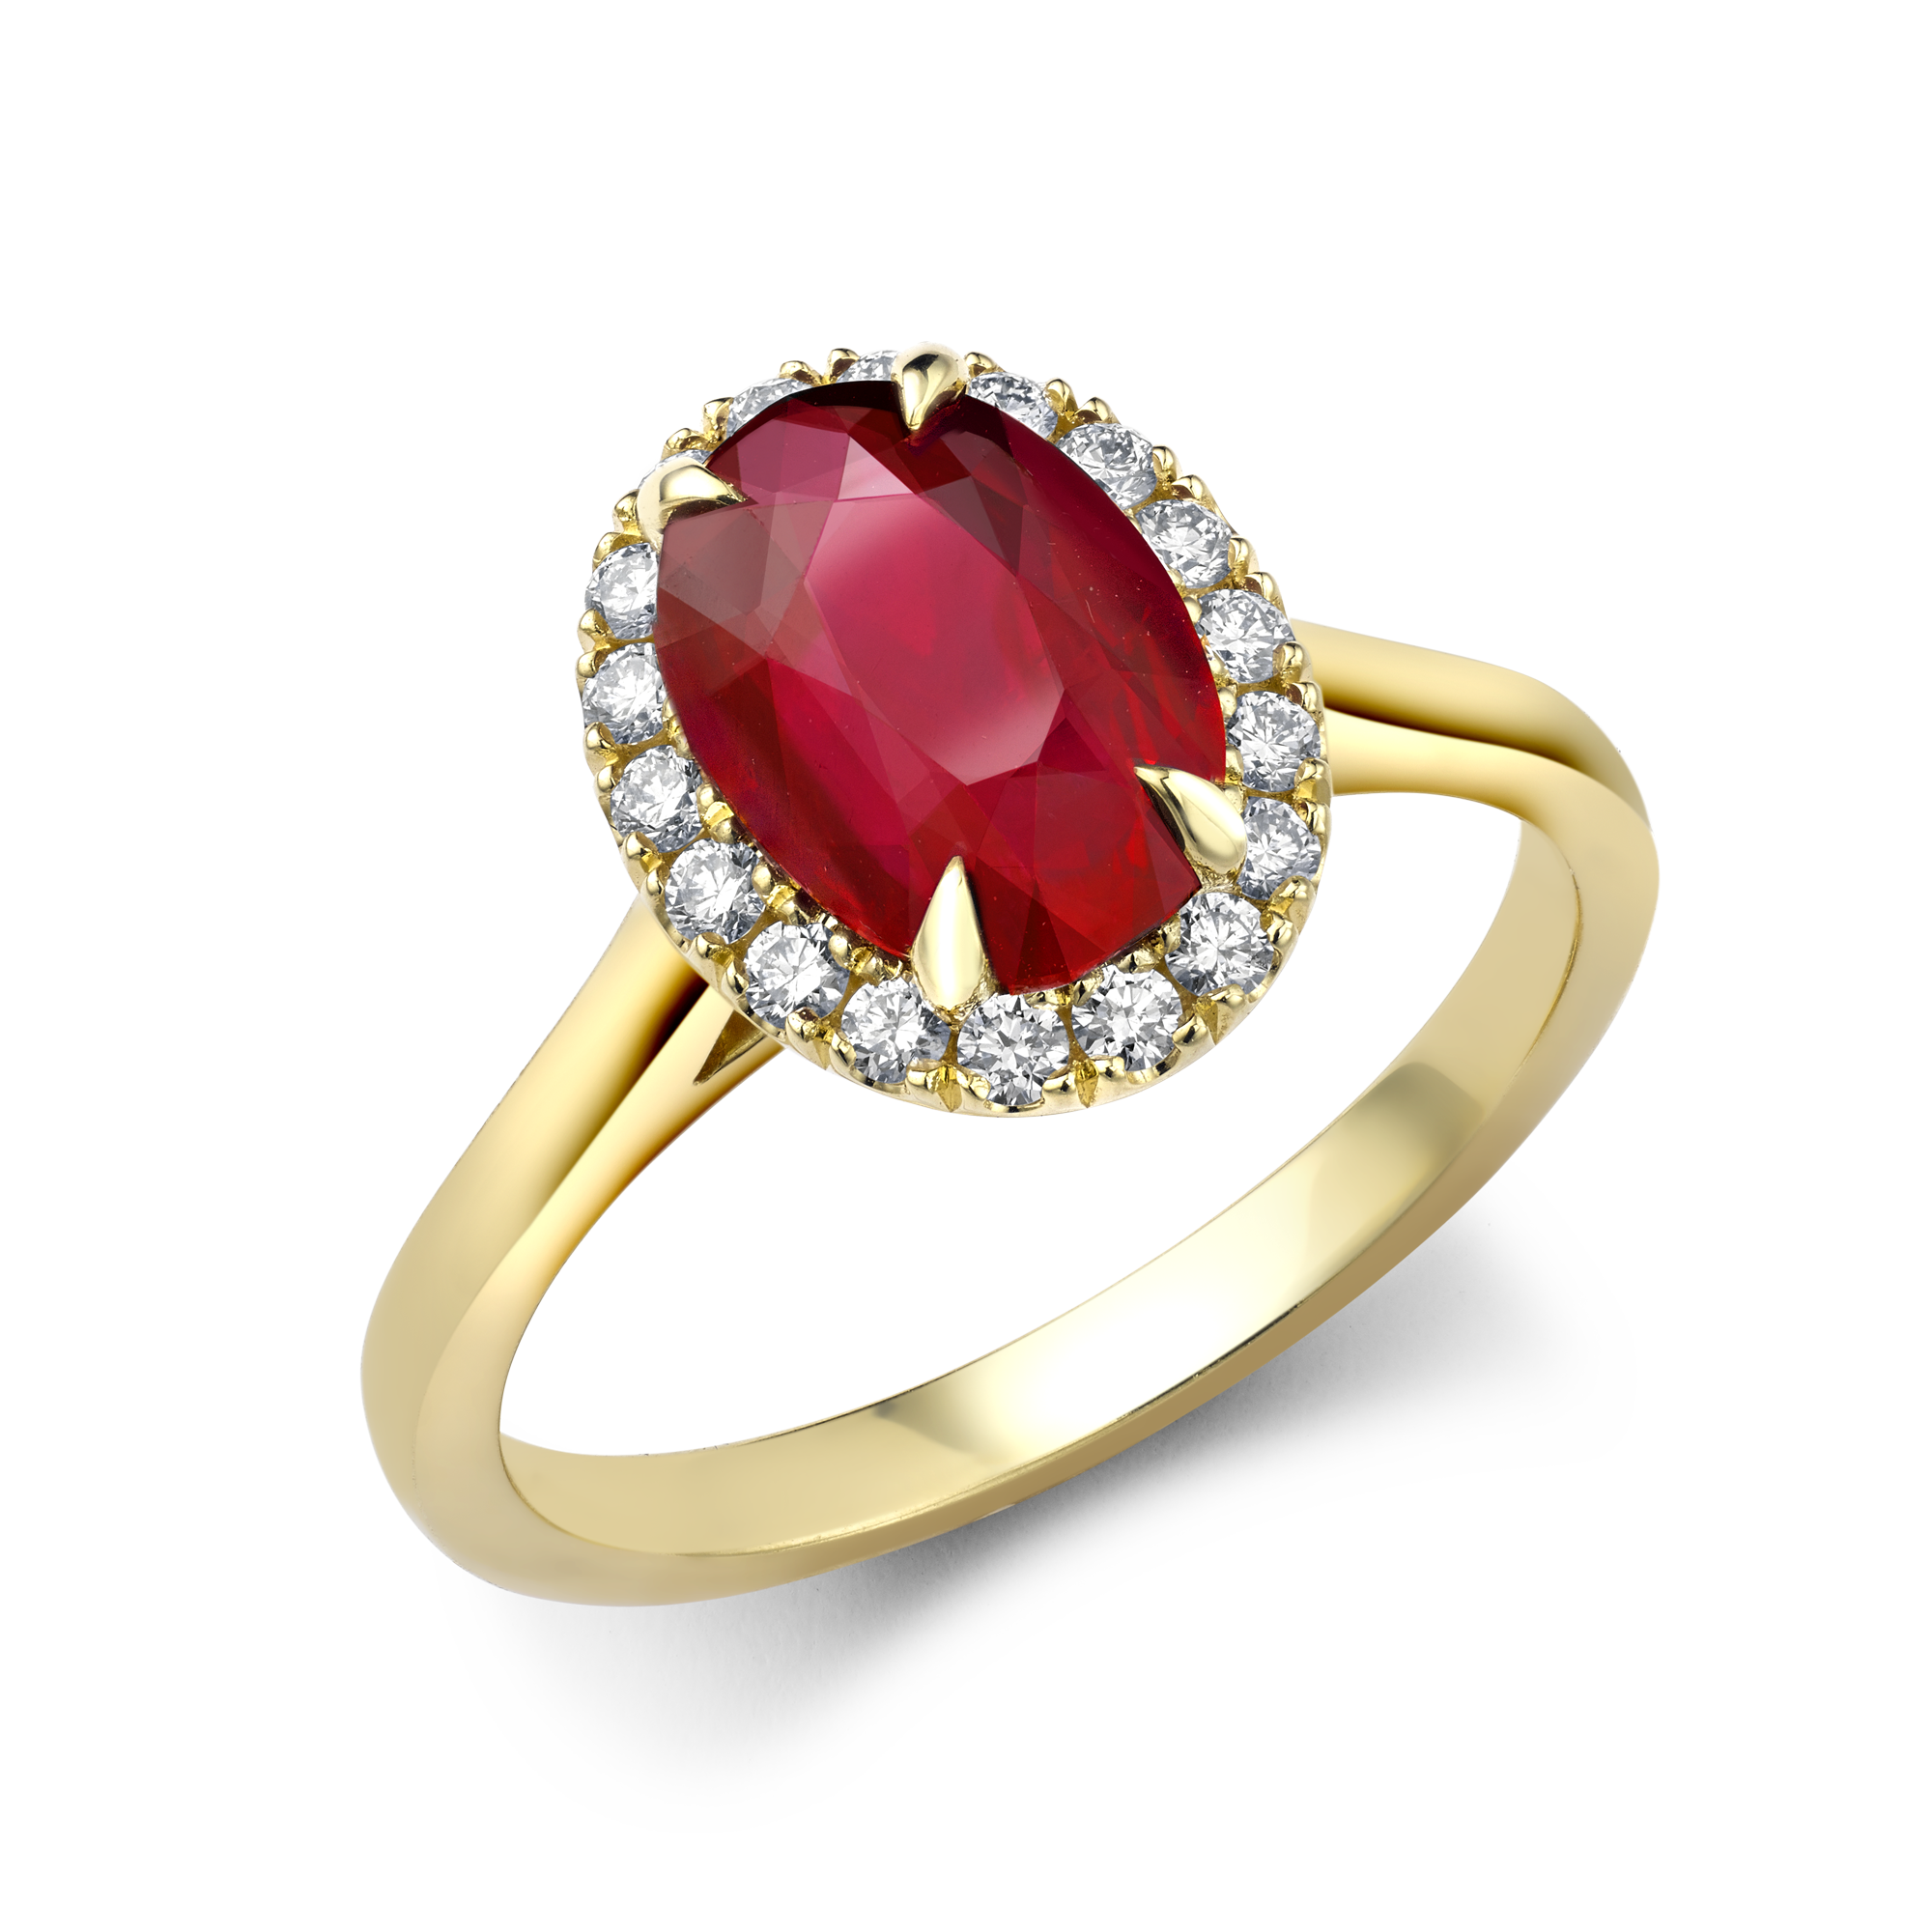 Celestial Mozambique 2.64ct Ruby and Diamond Cluster Ring Oval Cut, Claw Set_1